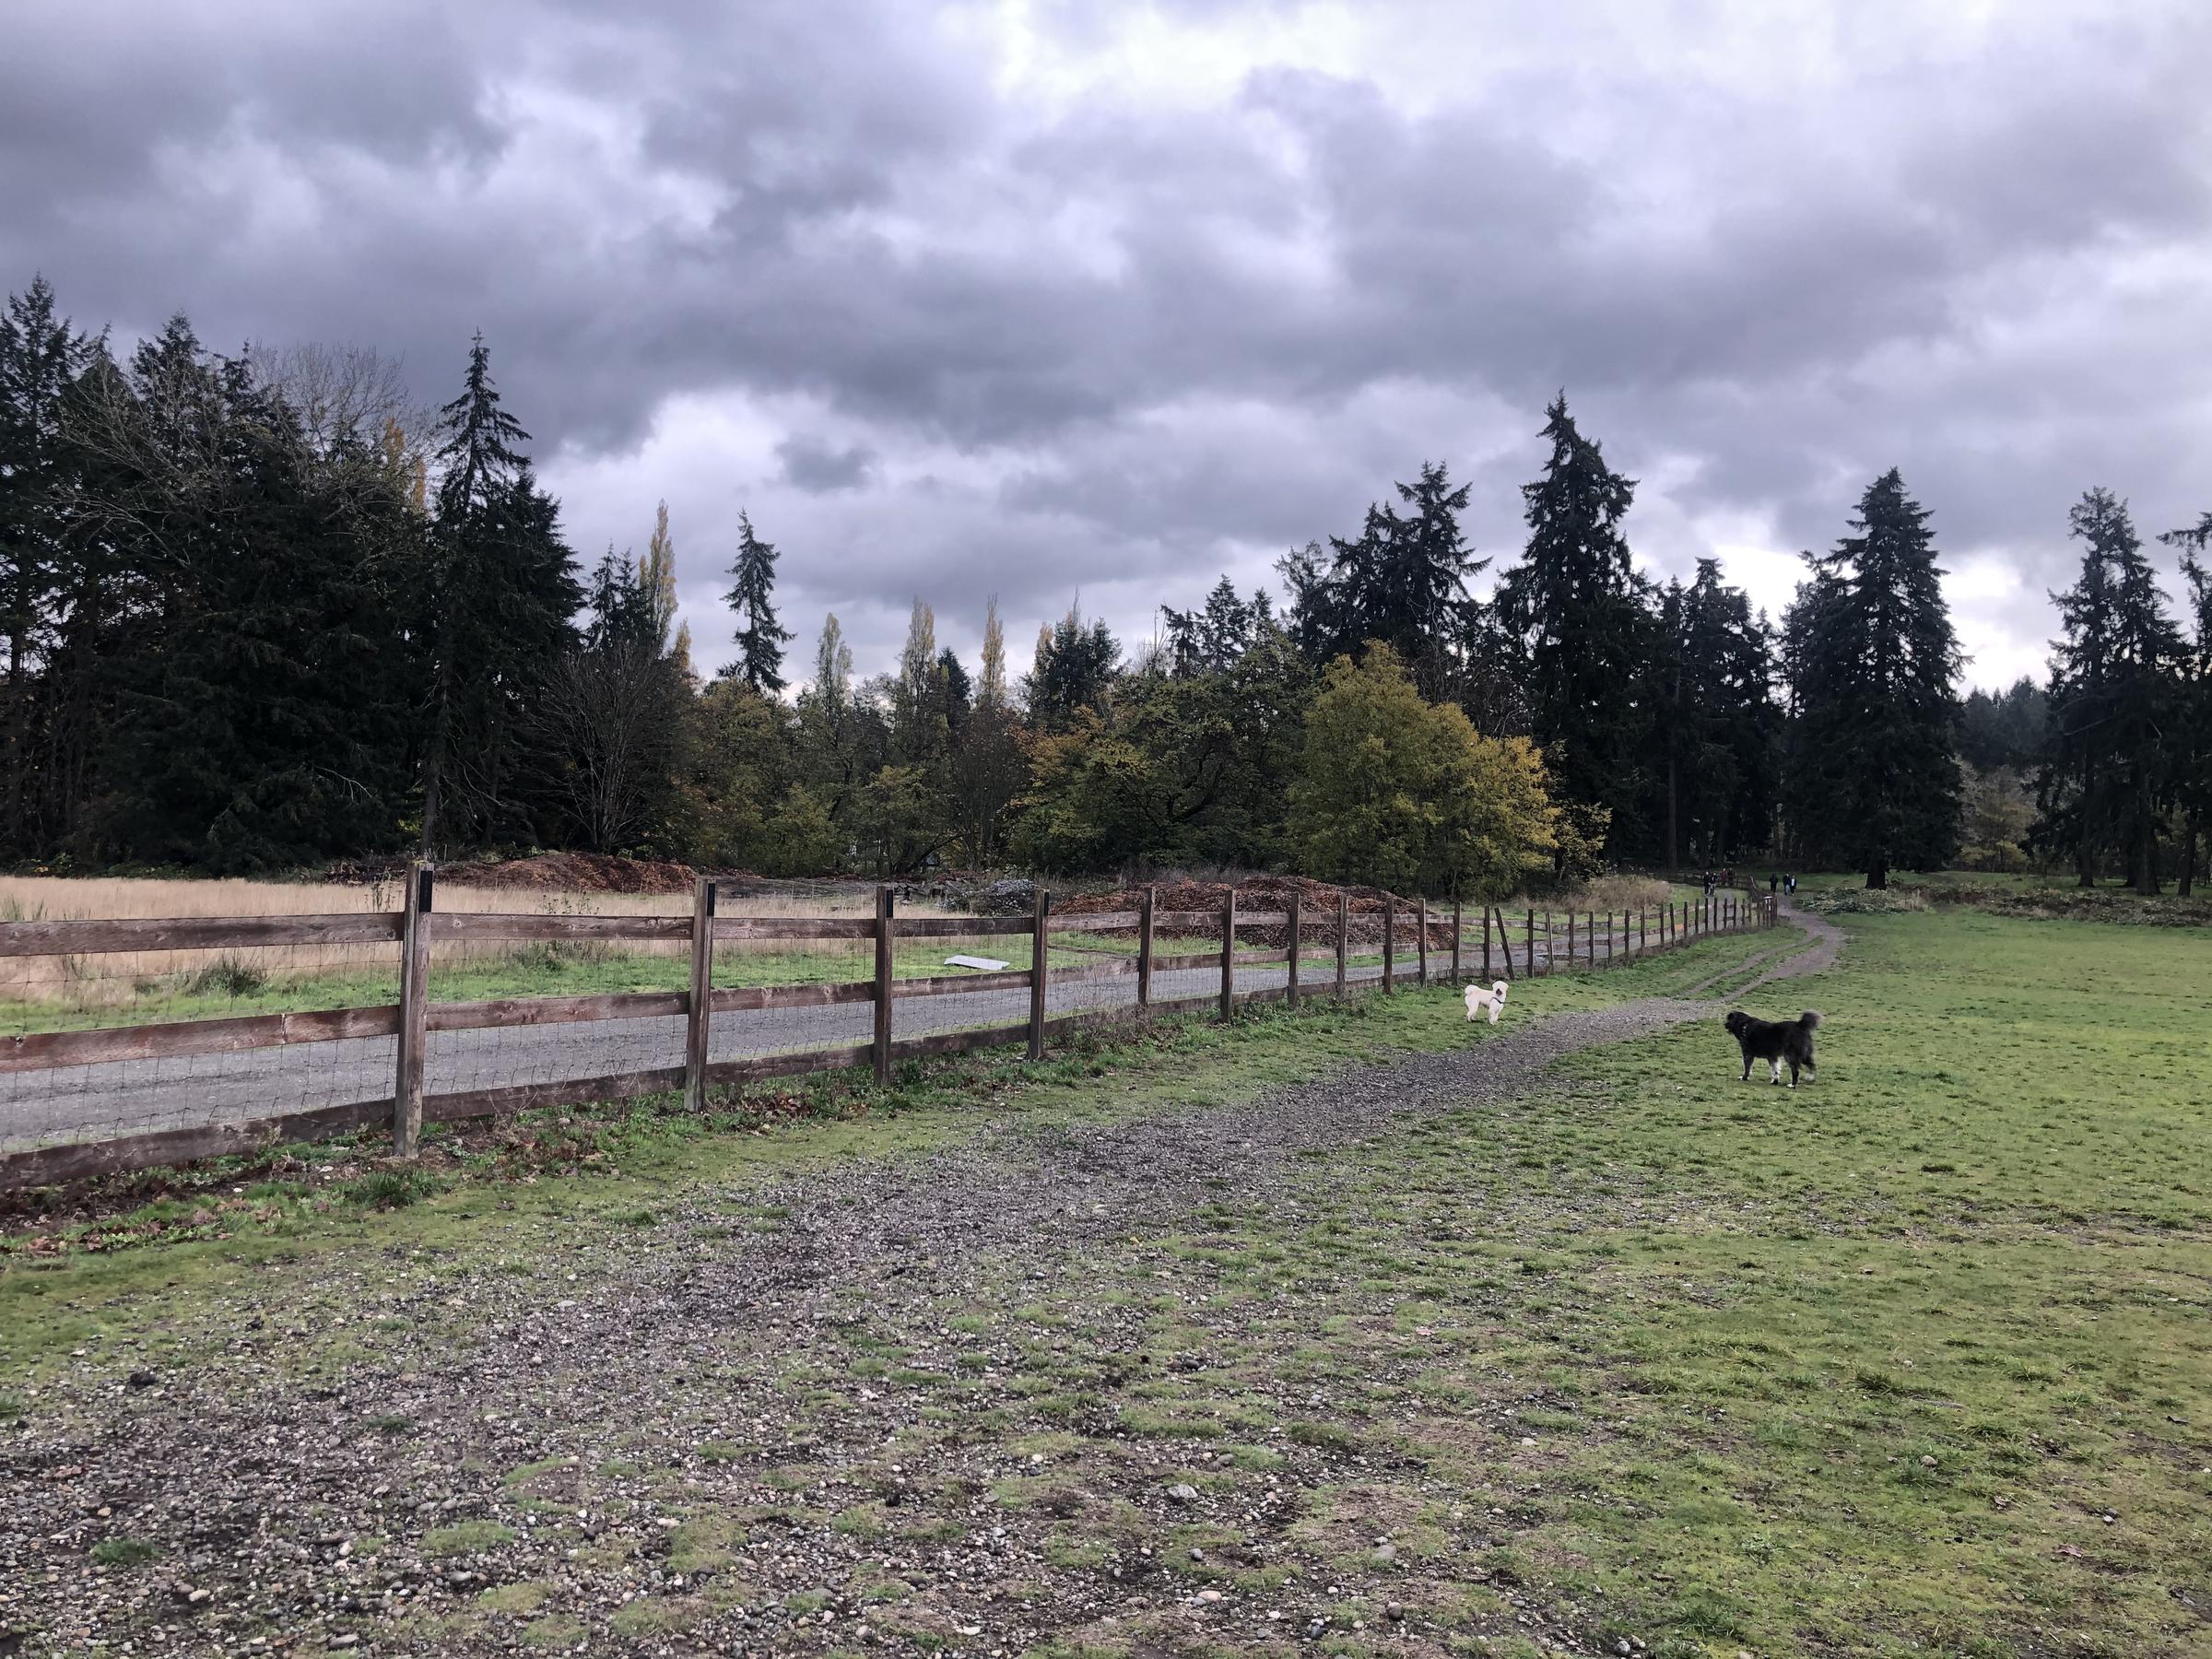 are dogs allowed at fort steilacoom park